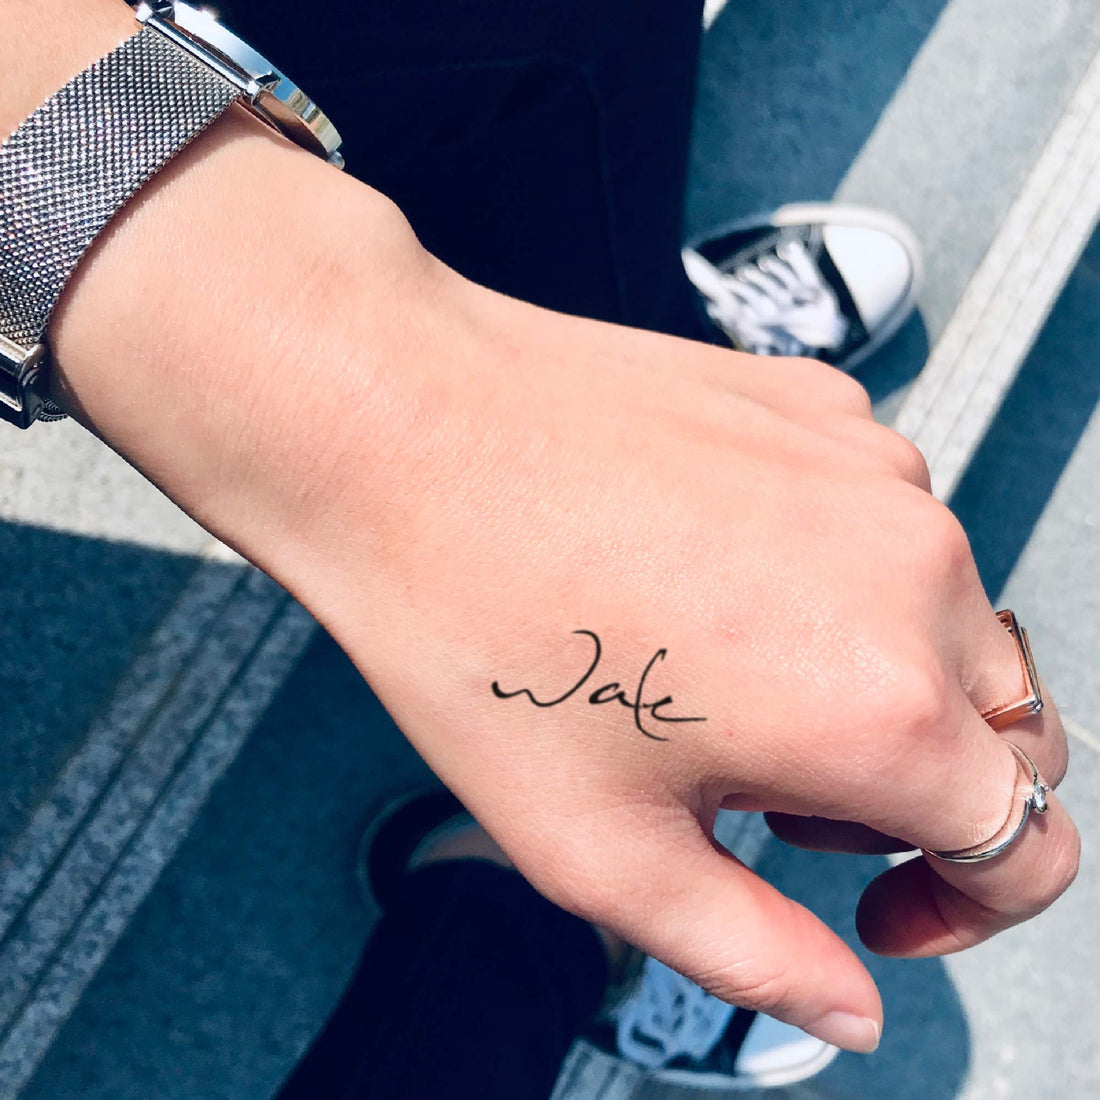 Wale custom temporary tattoo sticker design idea inspiration meanings removal arm wrist hand words font name signature calligraphy lyrics tour concert outfits merch accessory gift souvenir costumes wear dress up code